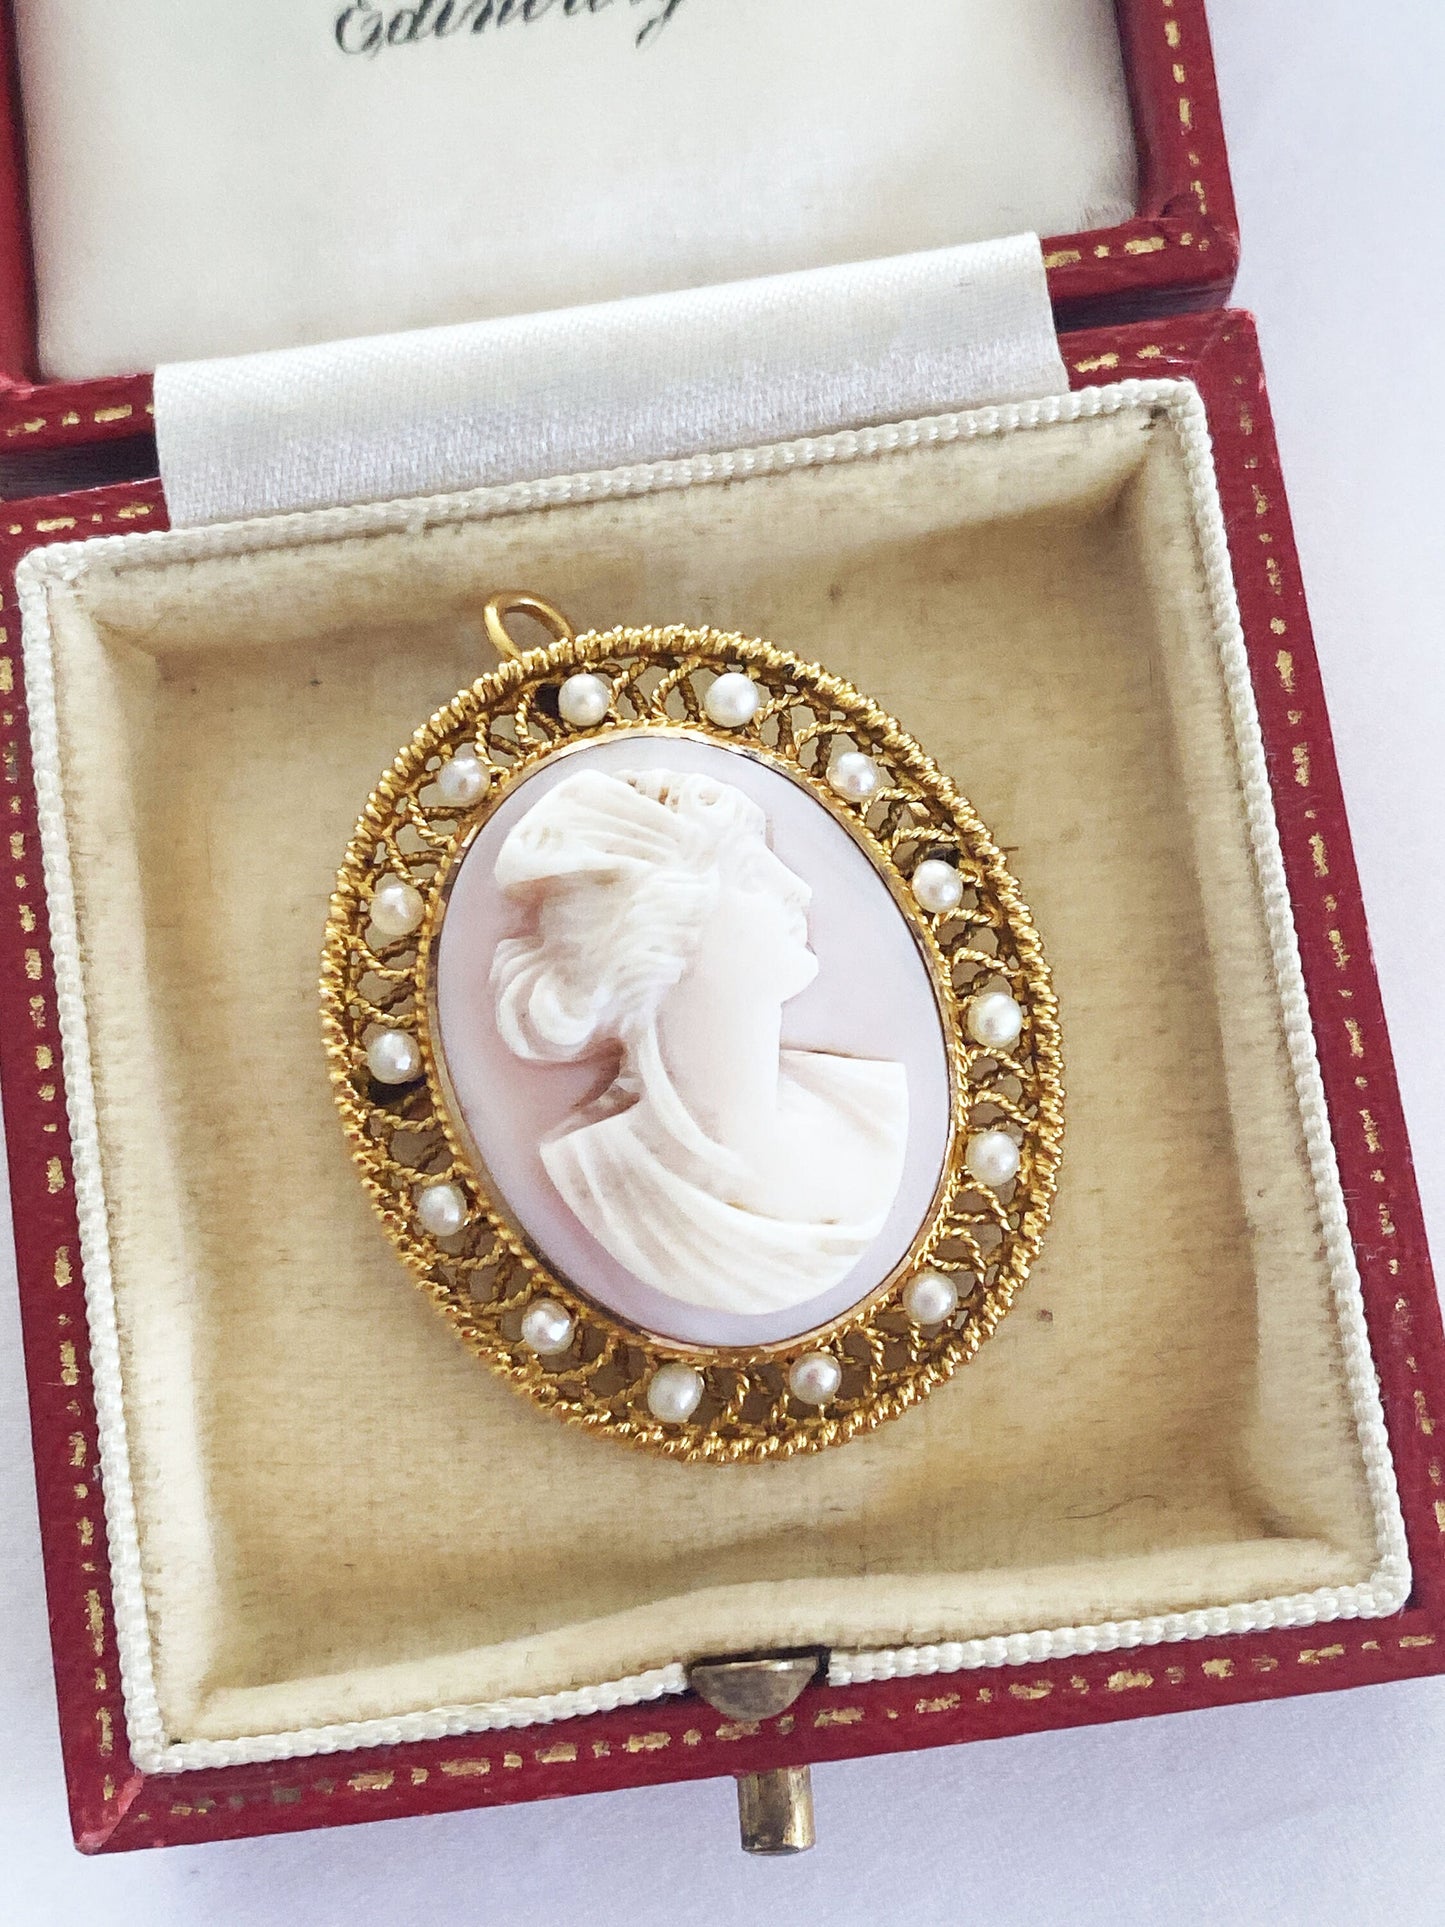 1900s 14k Gold and Pearl Cameo Convertible Brooch Antique Pendant Romantic Cameo Art Nouveau Gift for Her